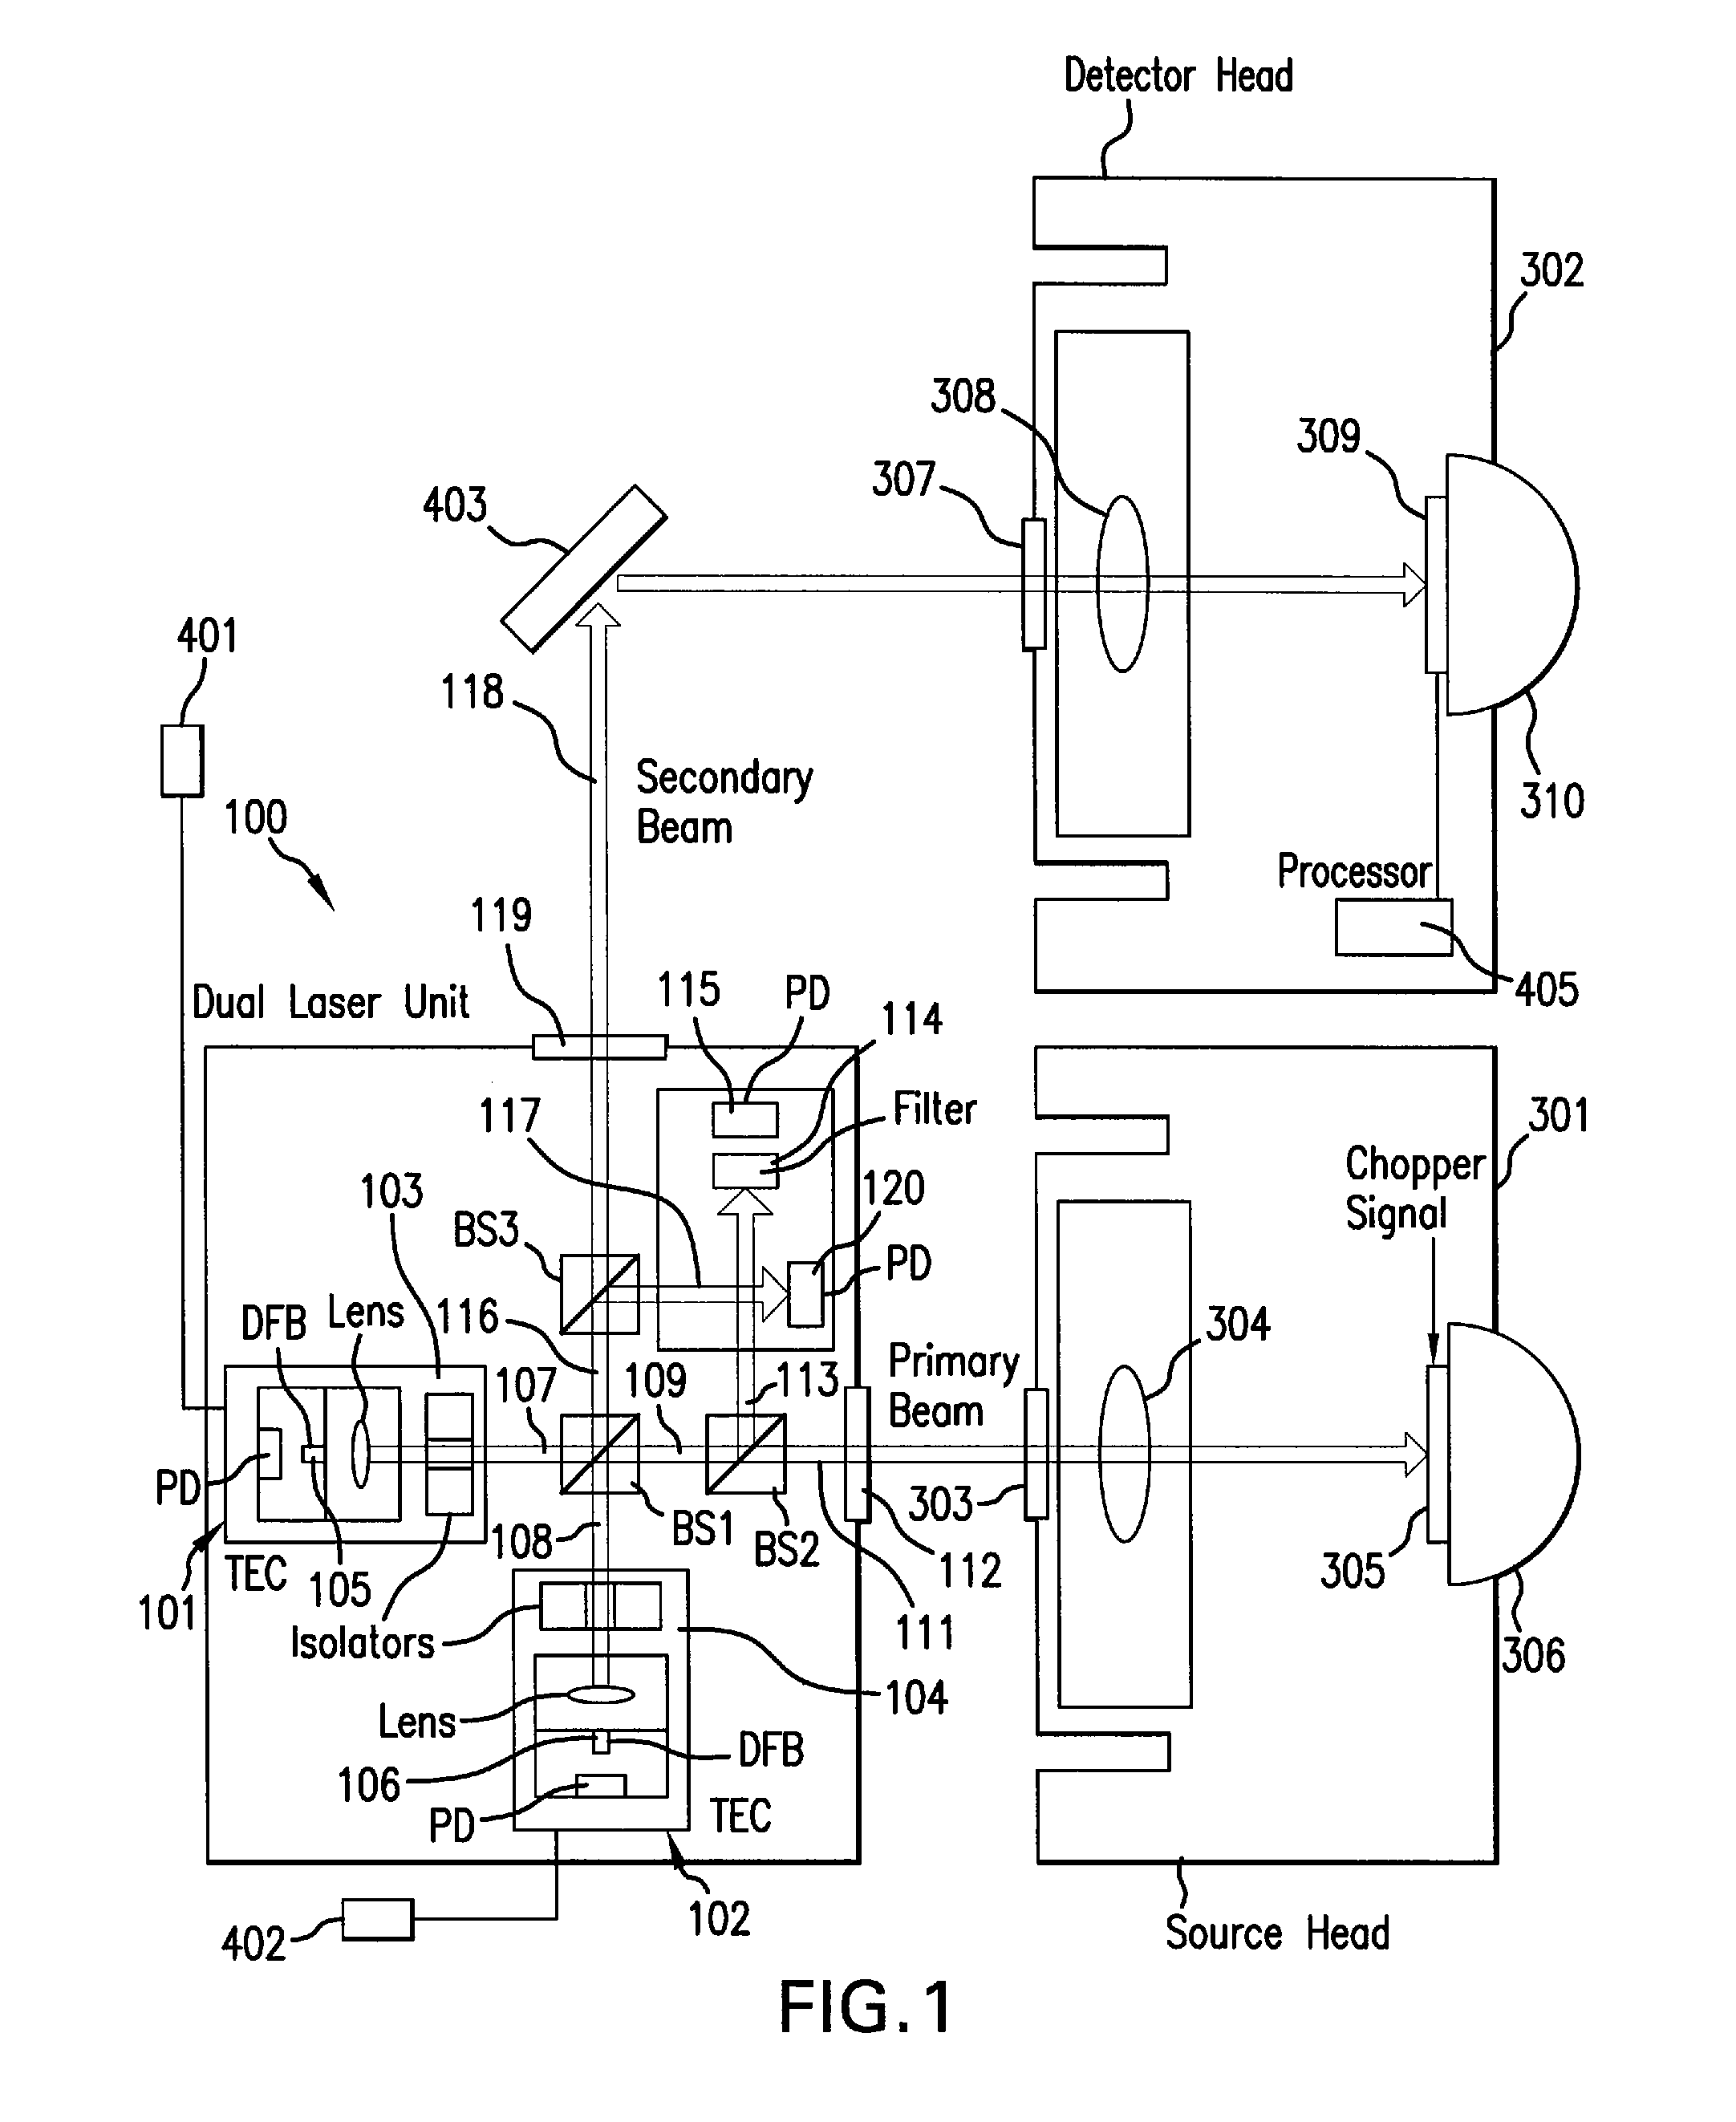 Terahertz Frequency Domain Spectrometer with Controllable Phase Shift